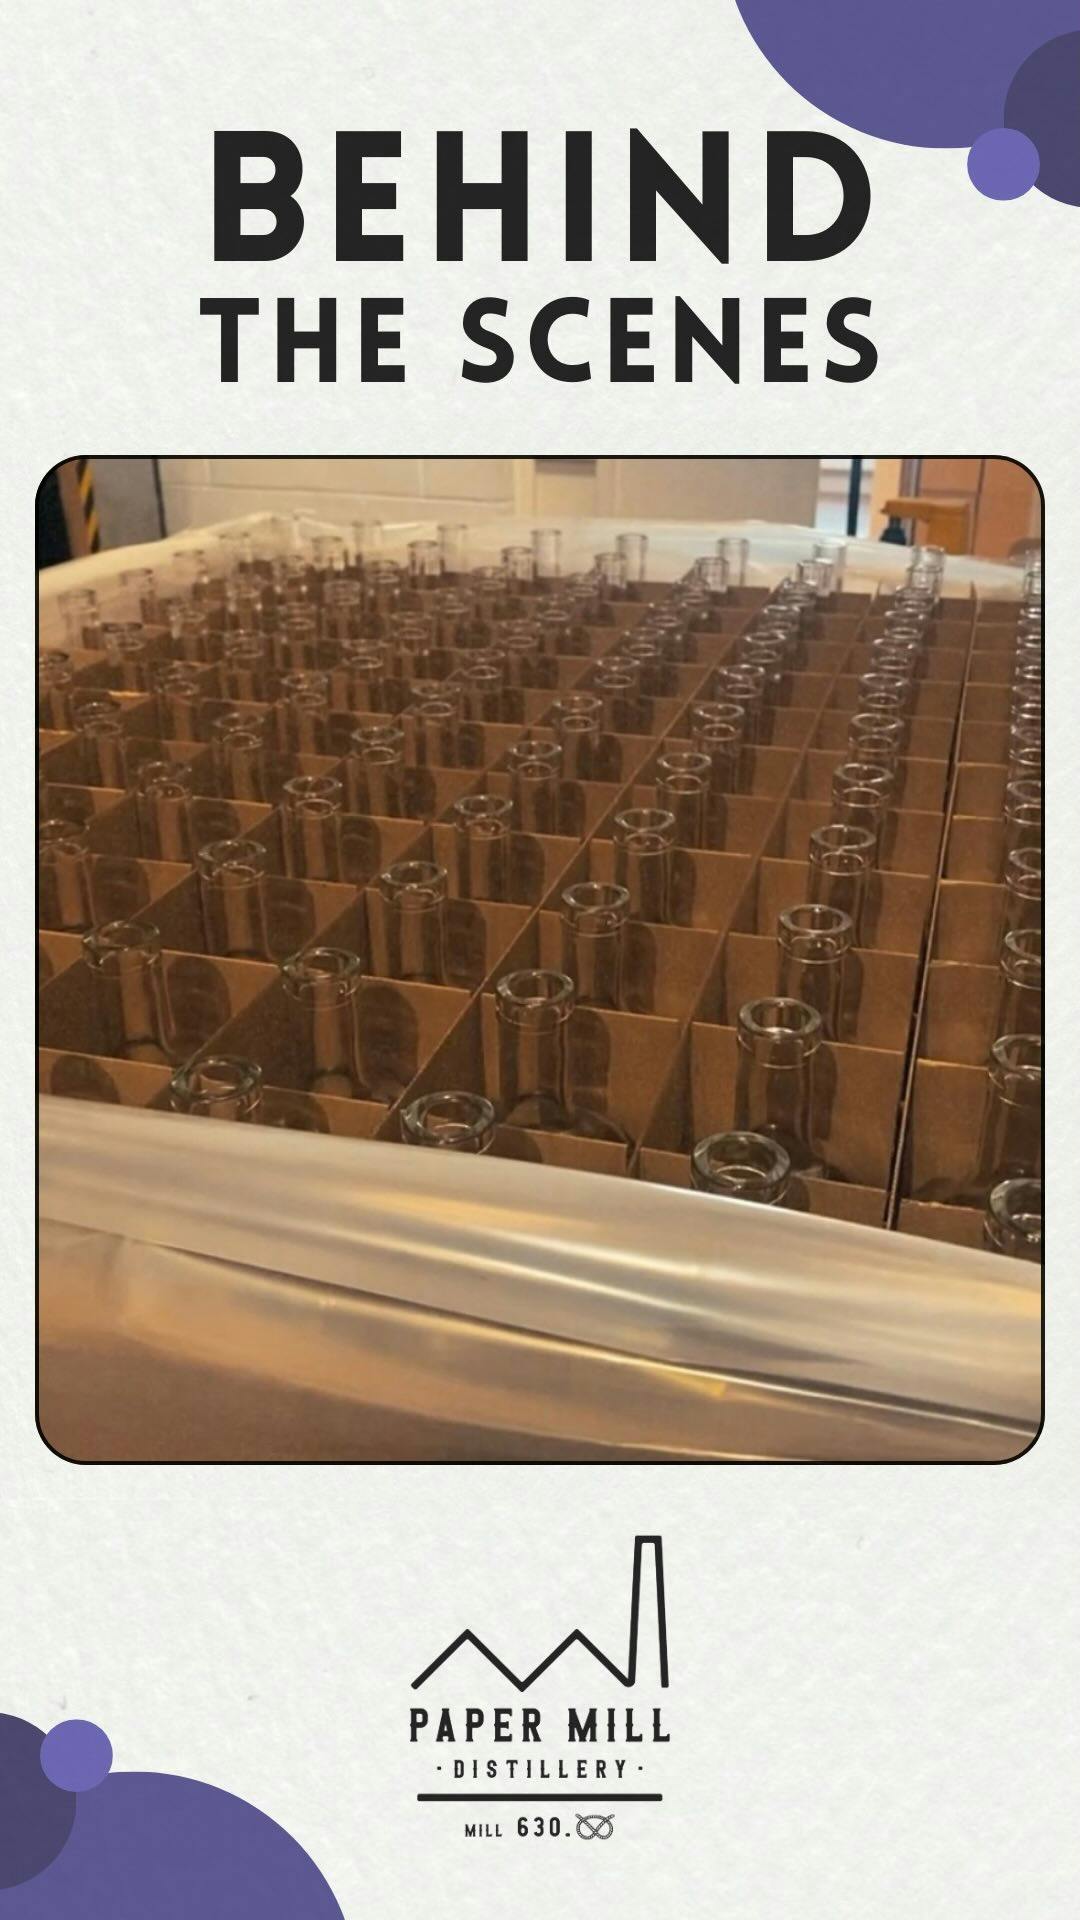 🚛📦 We accommodate large orders for contract filling!

We can hand bottle smaller orders whilst using our filling line for bigger quantities! This is great for customers when they need to fulfil potentially thousands of bottles at a time!

#distillery #distill #local #leek #staffordshire #cheddleton #gin #market #totallylocally #spirits #distiller #papermilldistillery #valentinesday #valentines #heath #verde #sumor #mill630 #chai #gandt #factory #behindthescenes #work #drink #drinks #bts #bartender #papermill